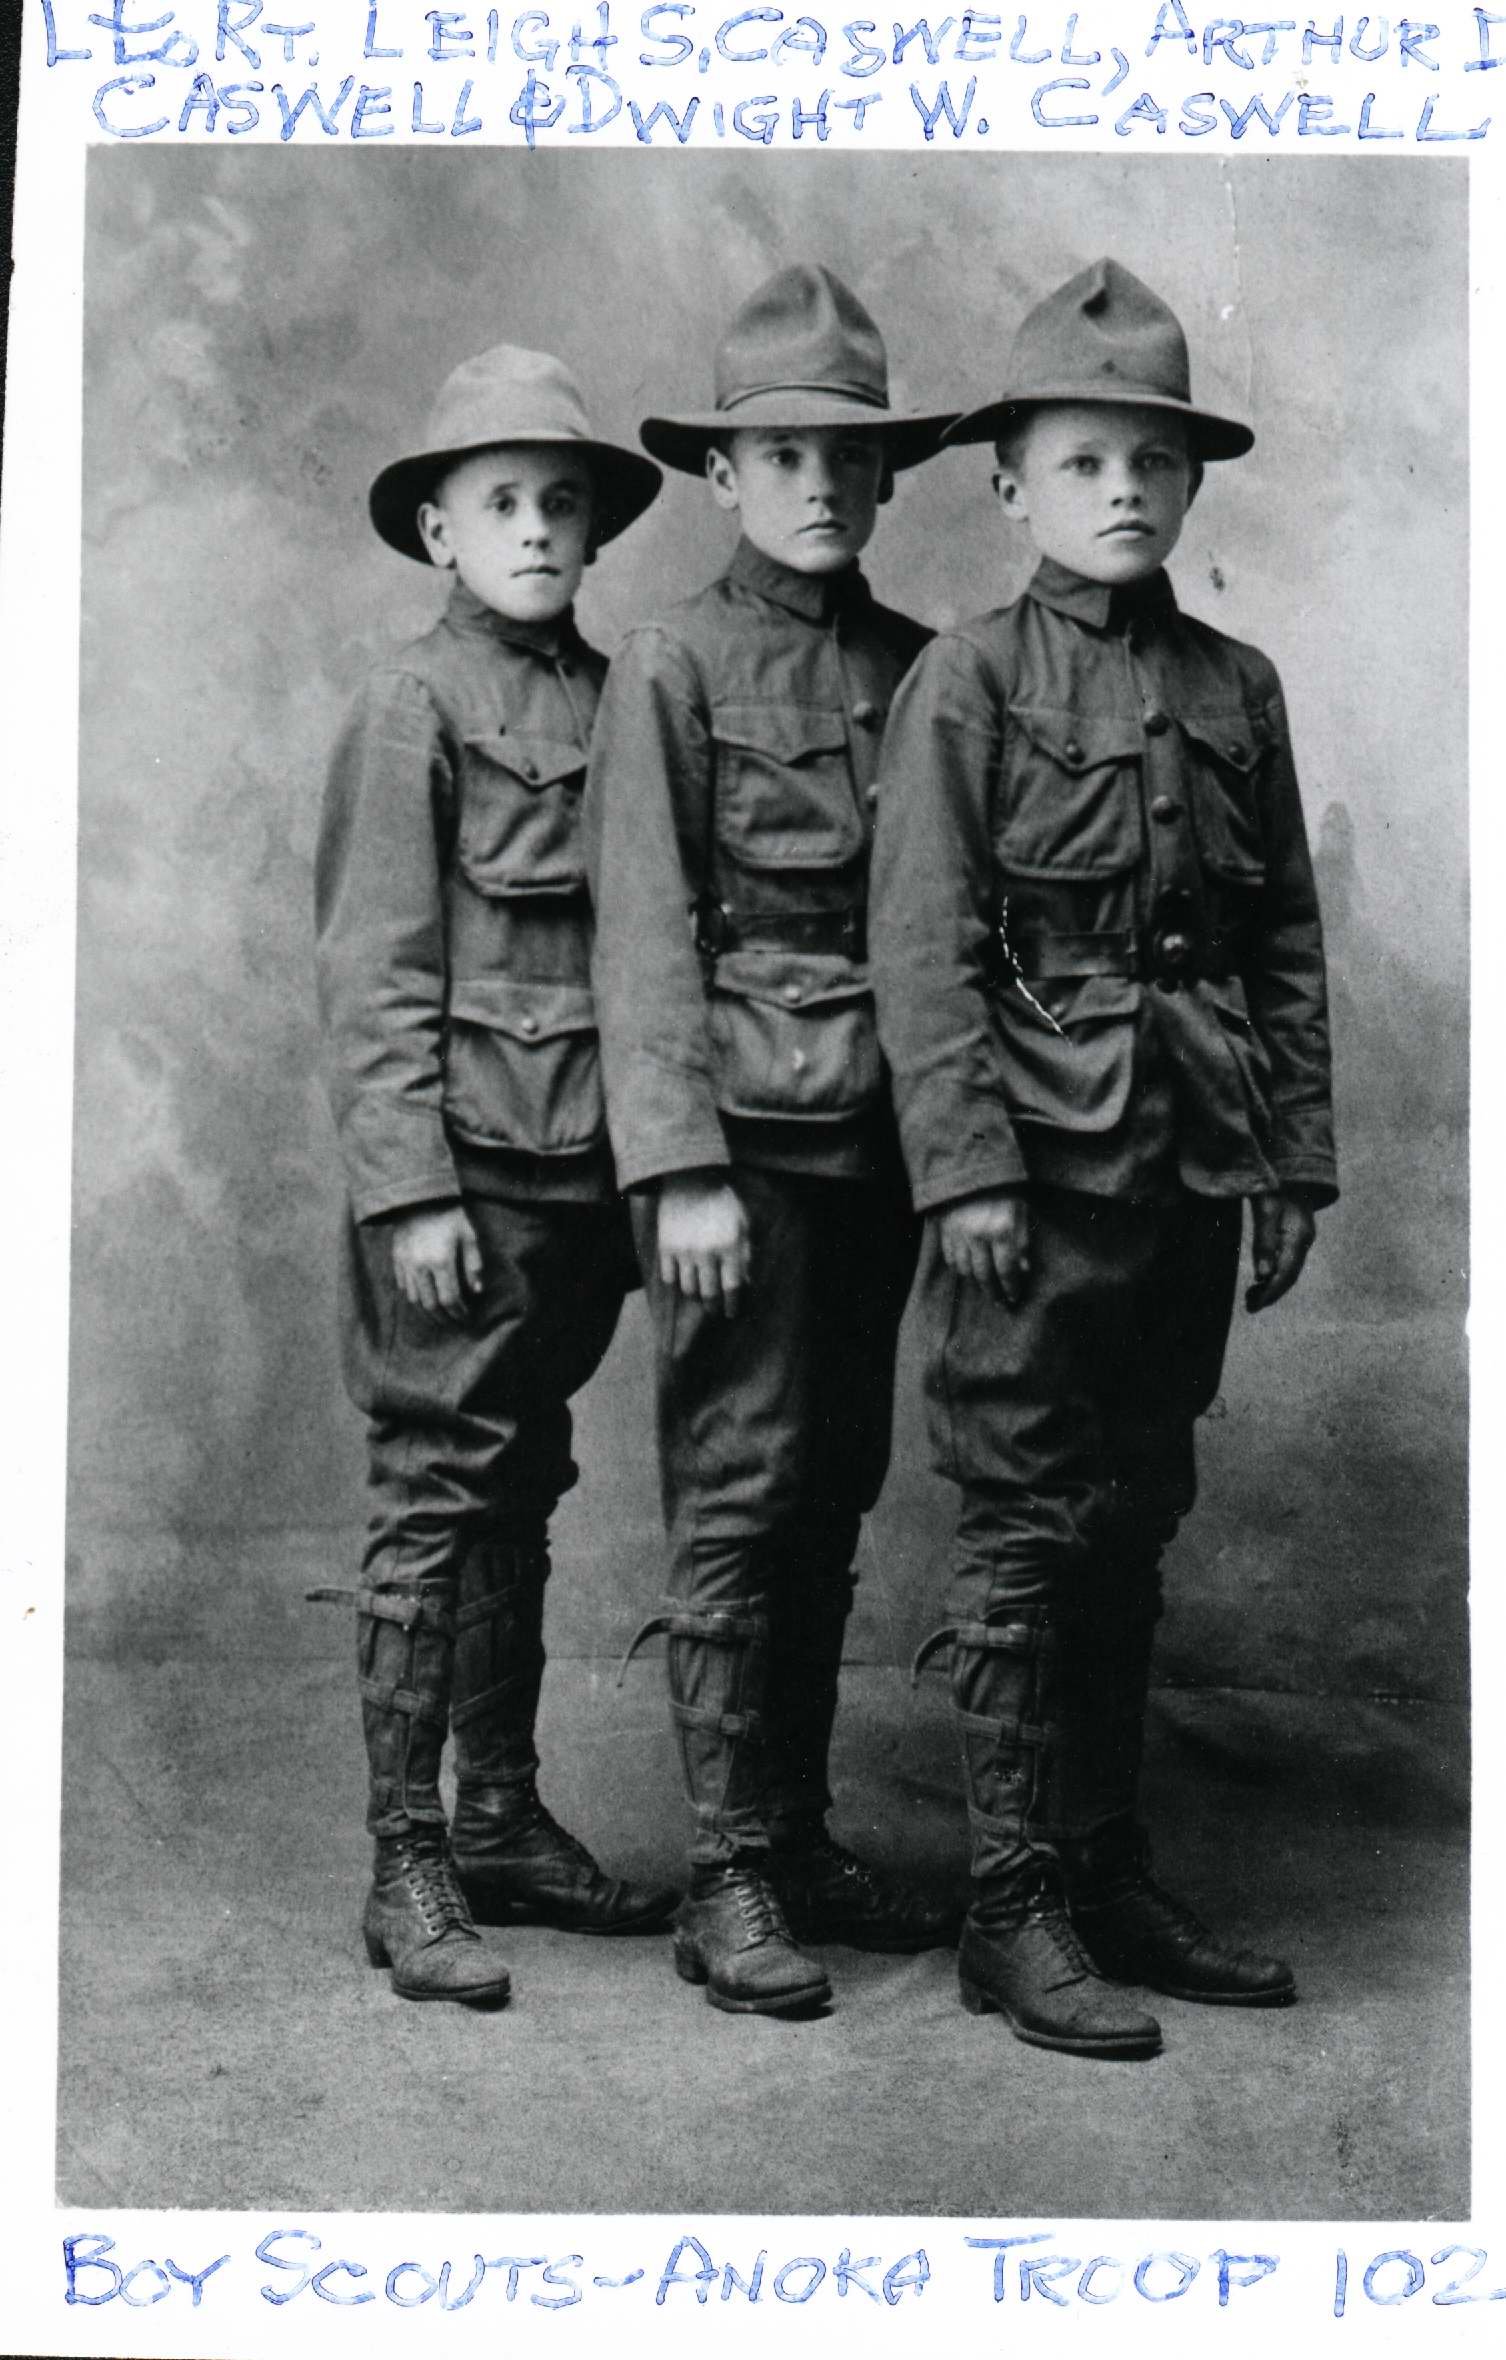 Arthur D. Caswell (middle) as a Boy Scouts circa 1910